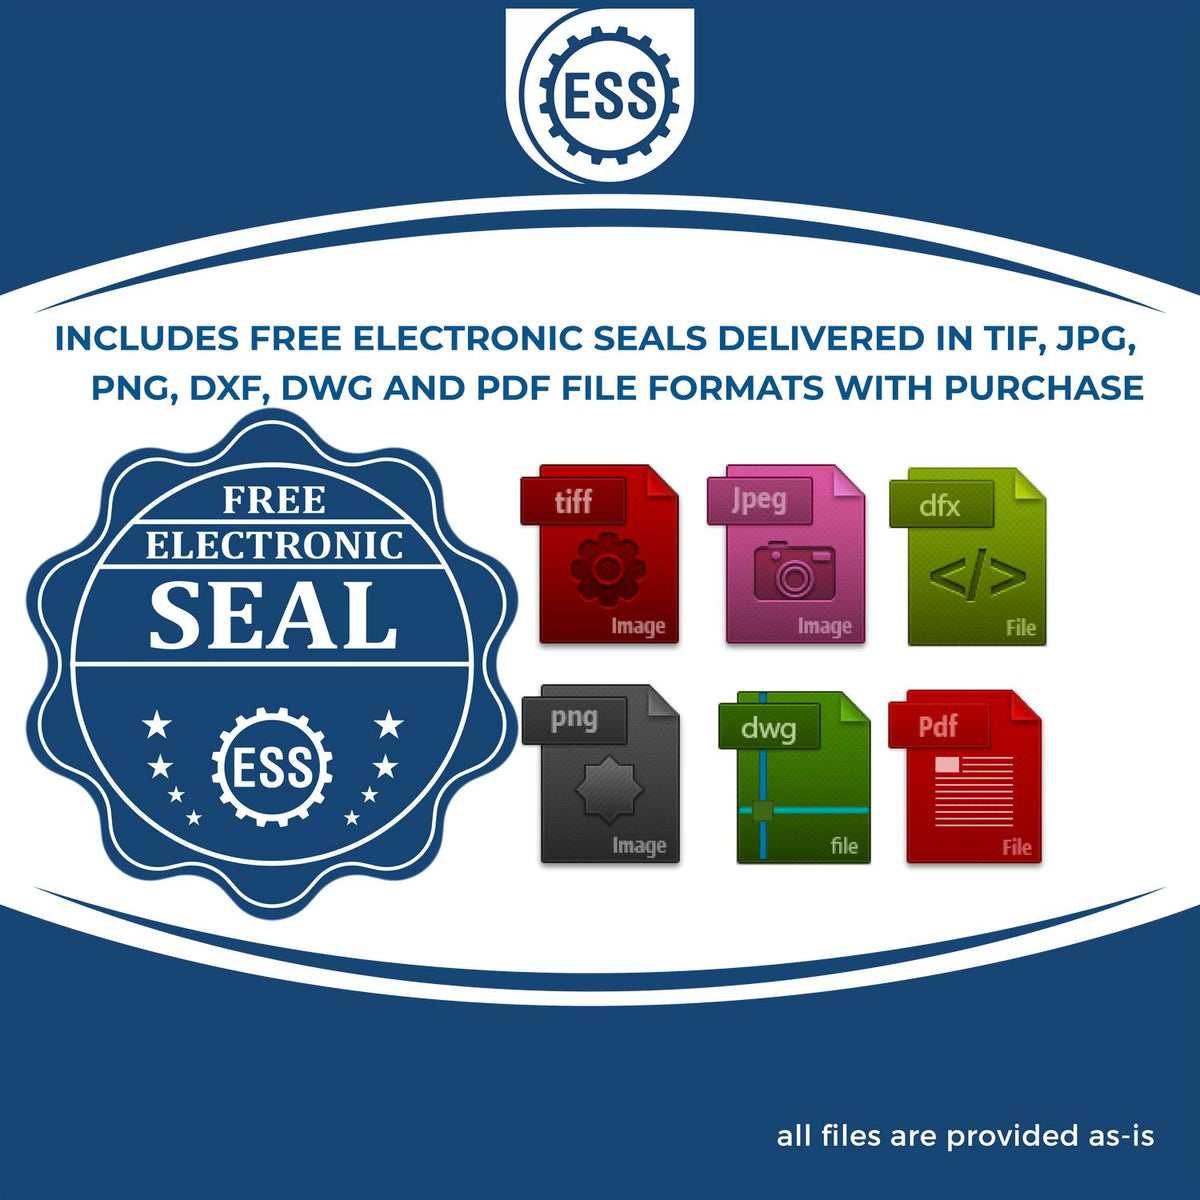 An infographic for the free electronic seal for the Premium MaxLight Pre-Inked West Virginia Landscape Architectural Stamp illustrating the different file type icons such as DXF, DWG, TIF, JPG and PNG.